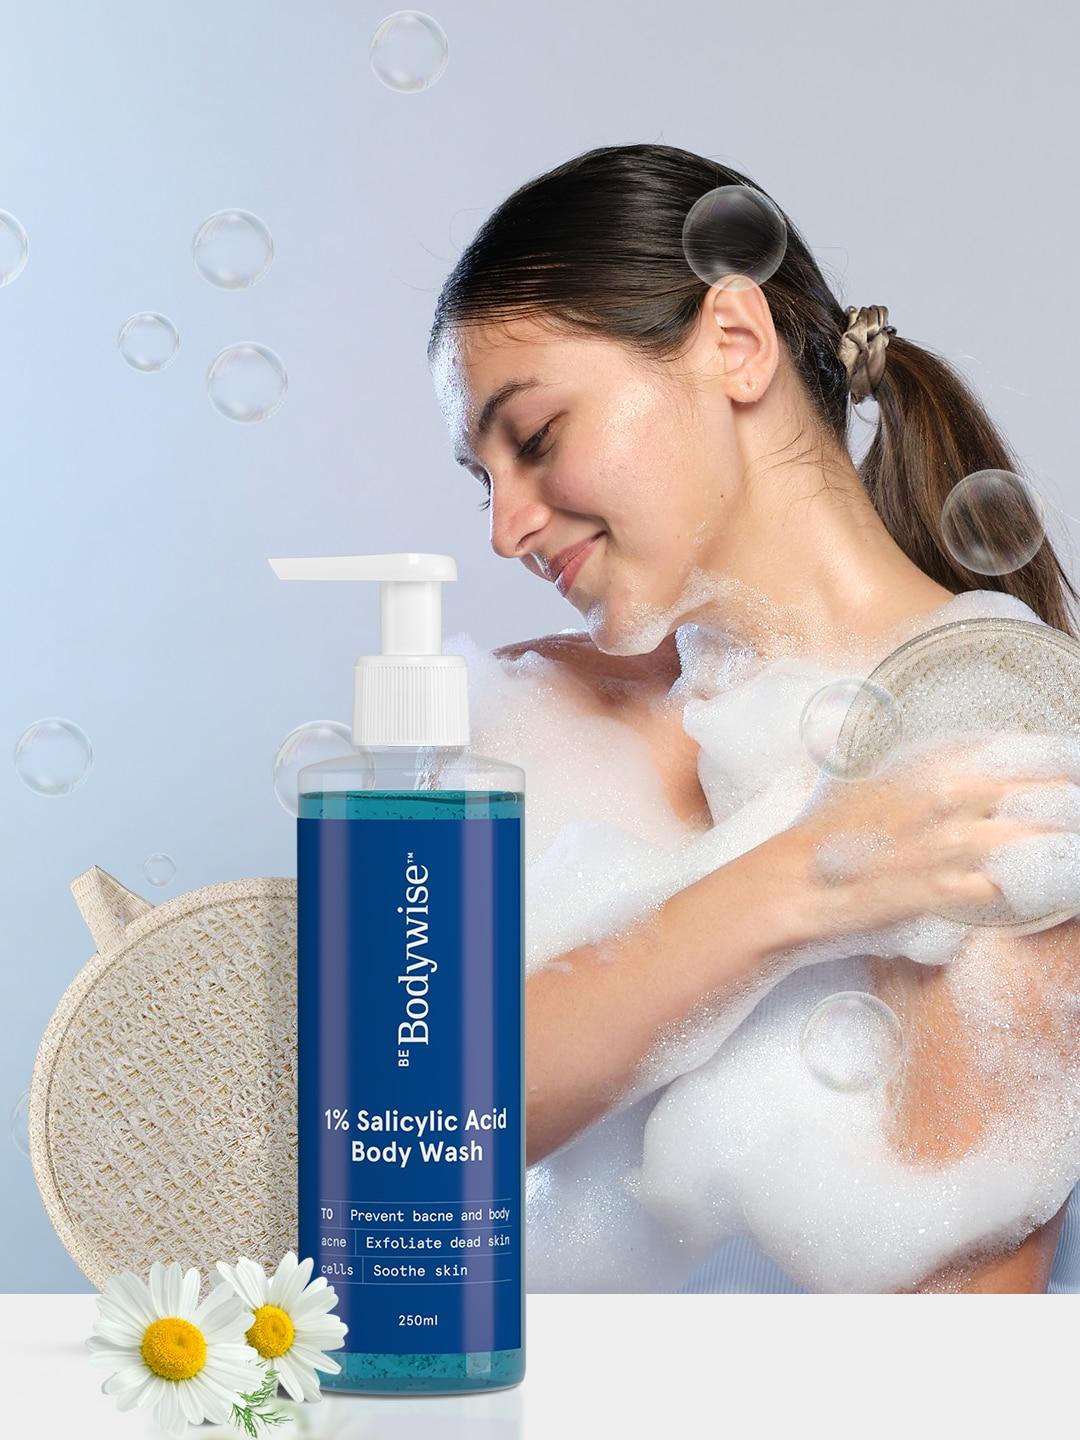 be bodywise 1% salicylic acid body wash 250 ml with free loofah to prevent body acne